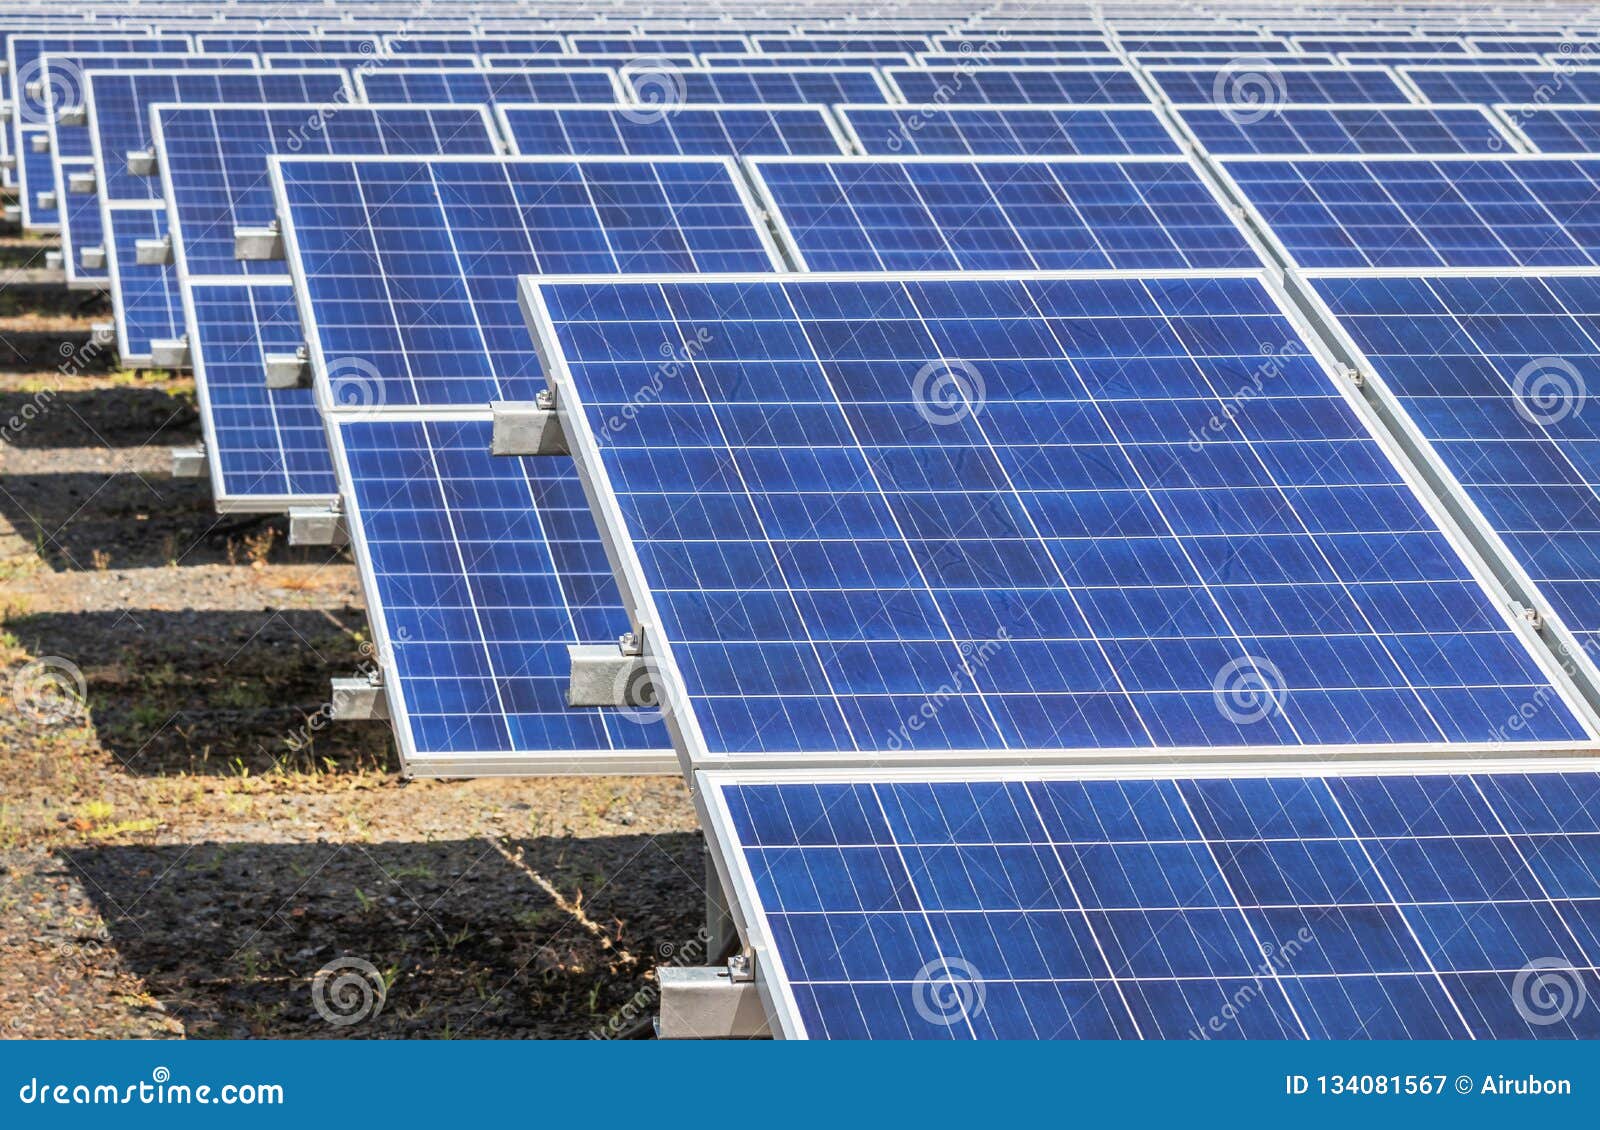 rows array of polycrystalline silicon solar cells or photovoltaics cell in solar power plant systems station